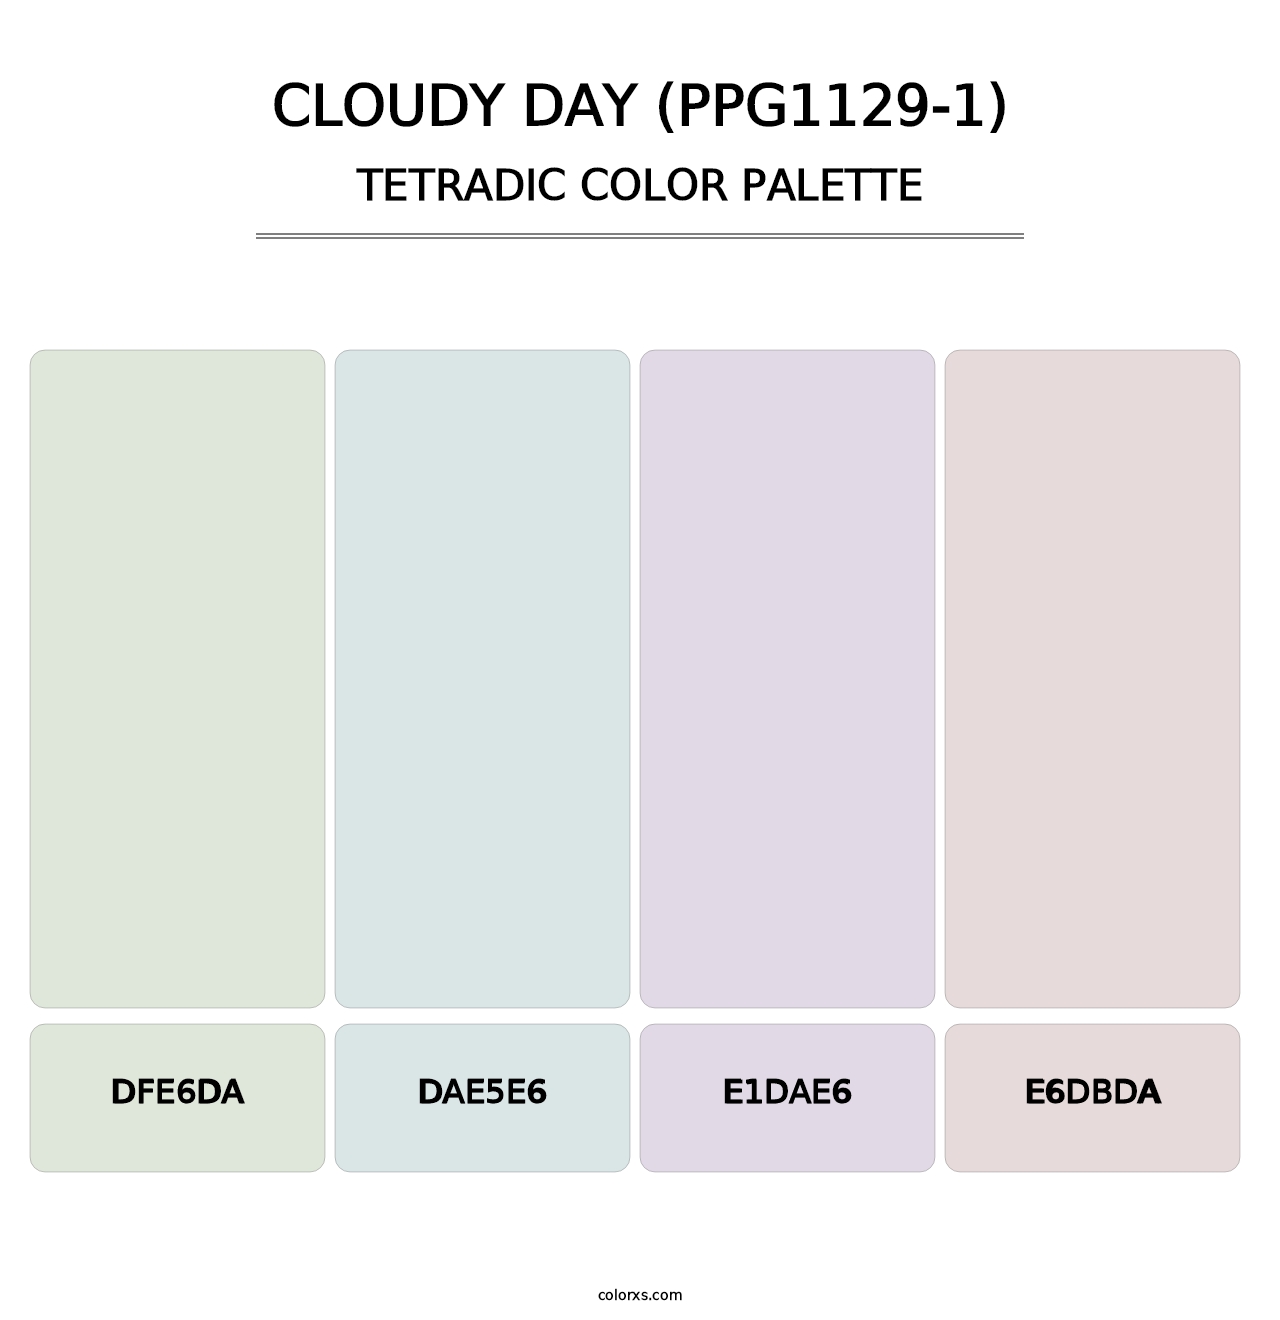 Cloudy Day (PPG1129-1) - Tetradic Color Palette